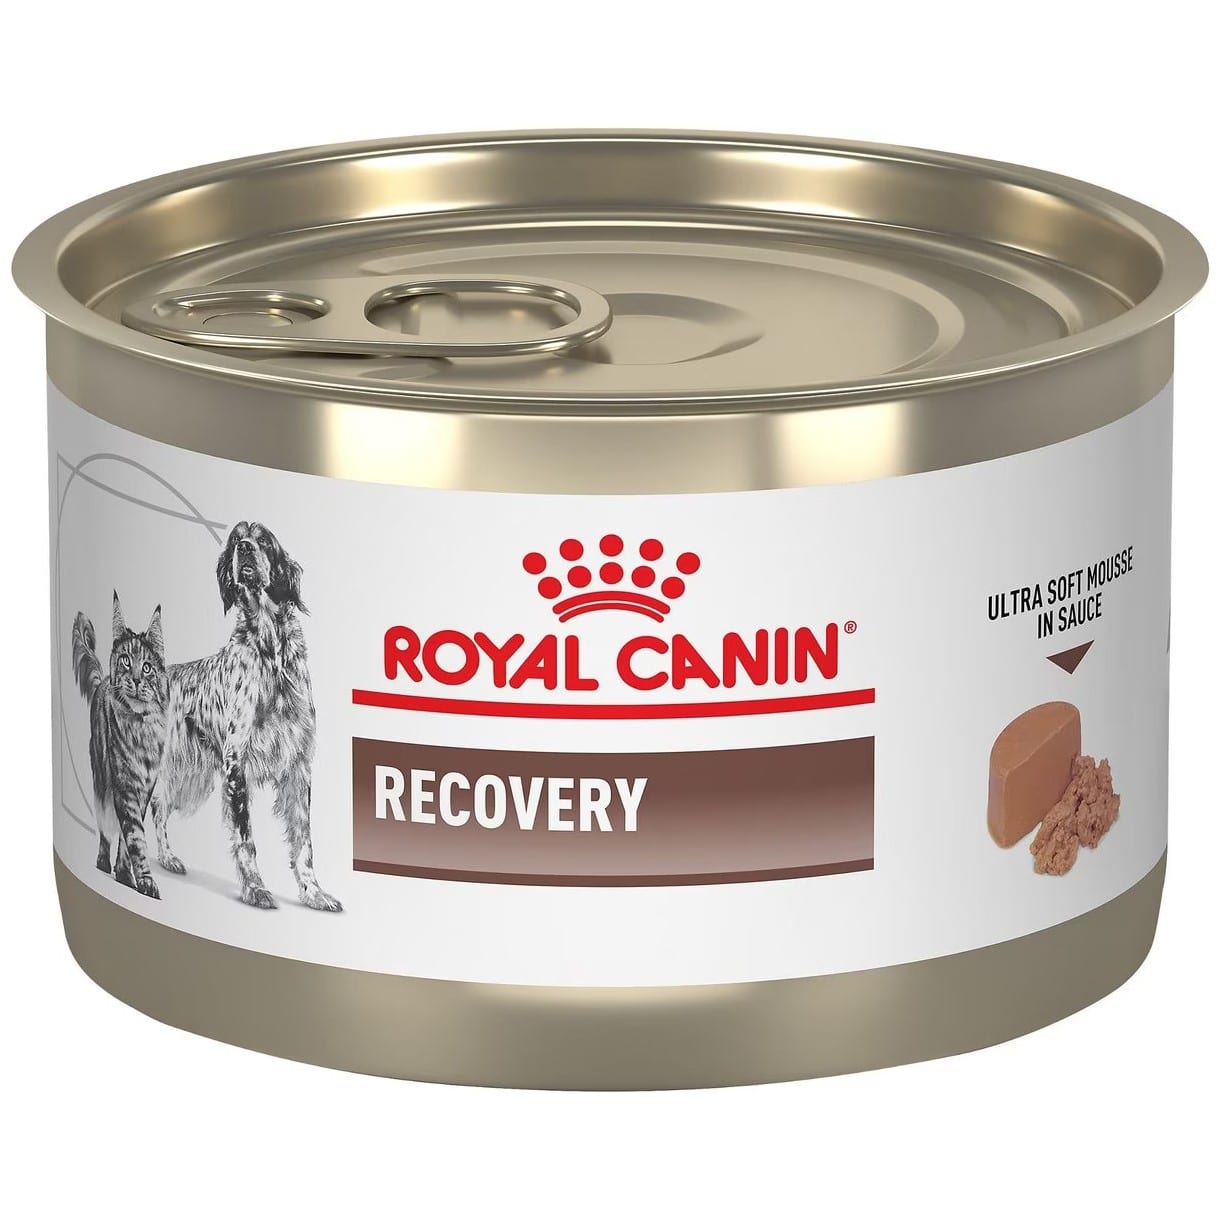 Royal Canin Veterinary Diet Recovery Ultra Soft Mousse in Sauce Wet Dog & Cat Food